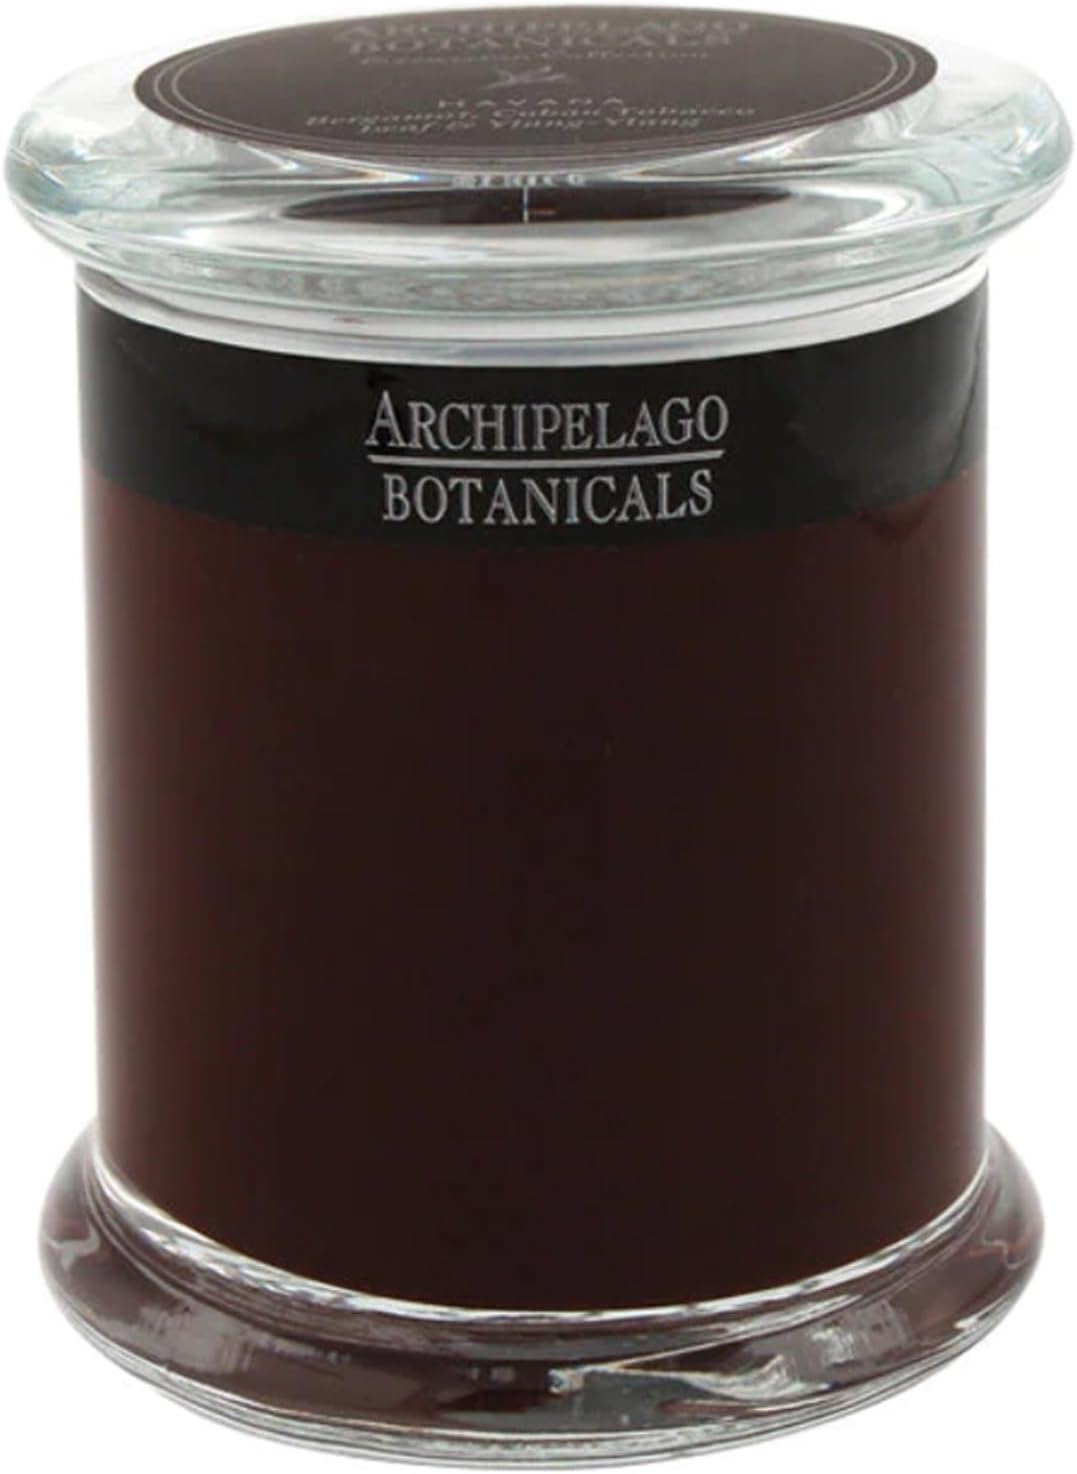 Archipelago Botanicals Havana Glass Jar Candle, Bergamot, Tobacco Flower and Ylang Ylang Scent, Lead-Free Candle Wicks, Burns Approx. 60 Hours (8.6 oz)